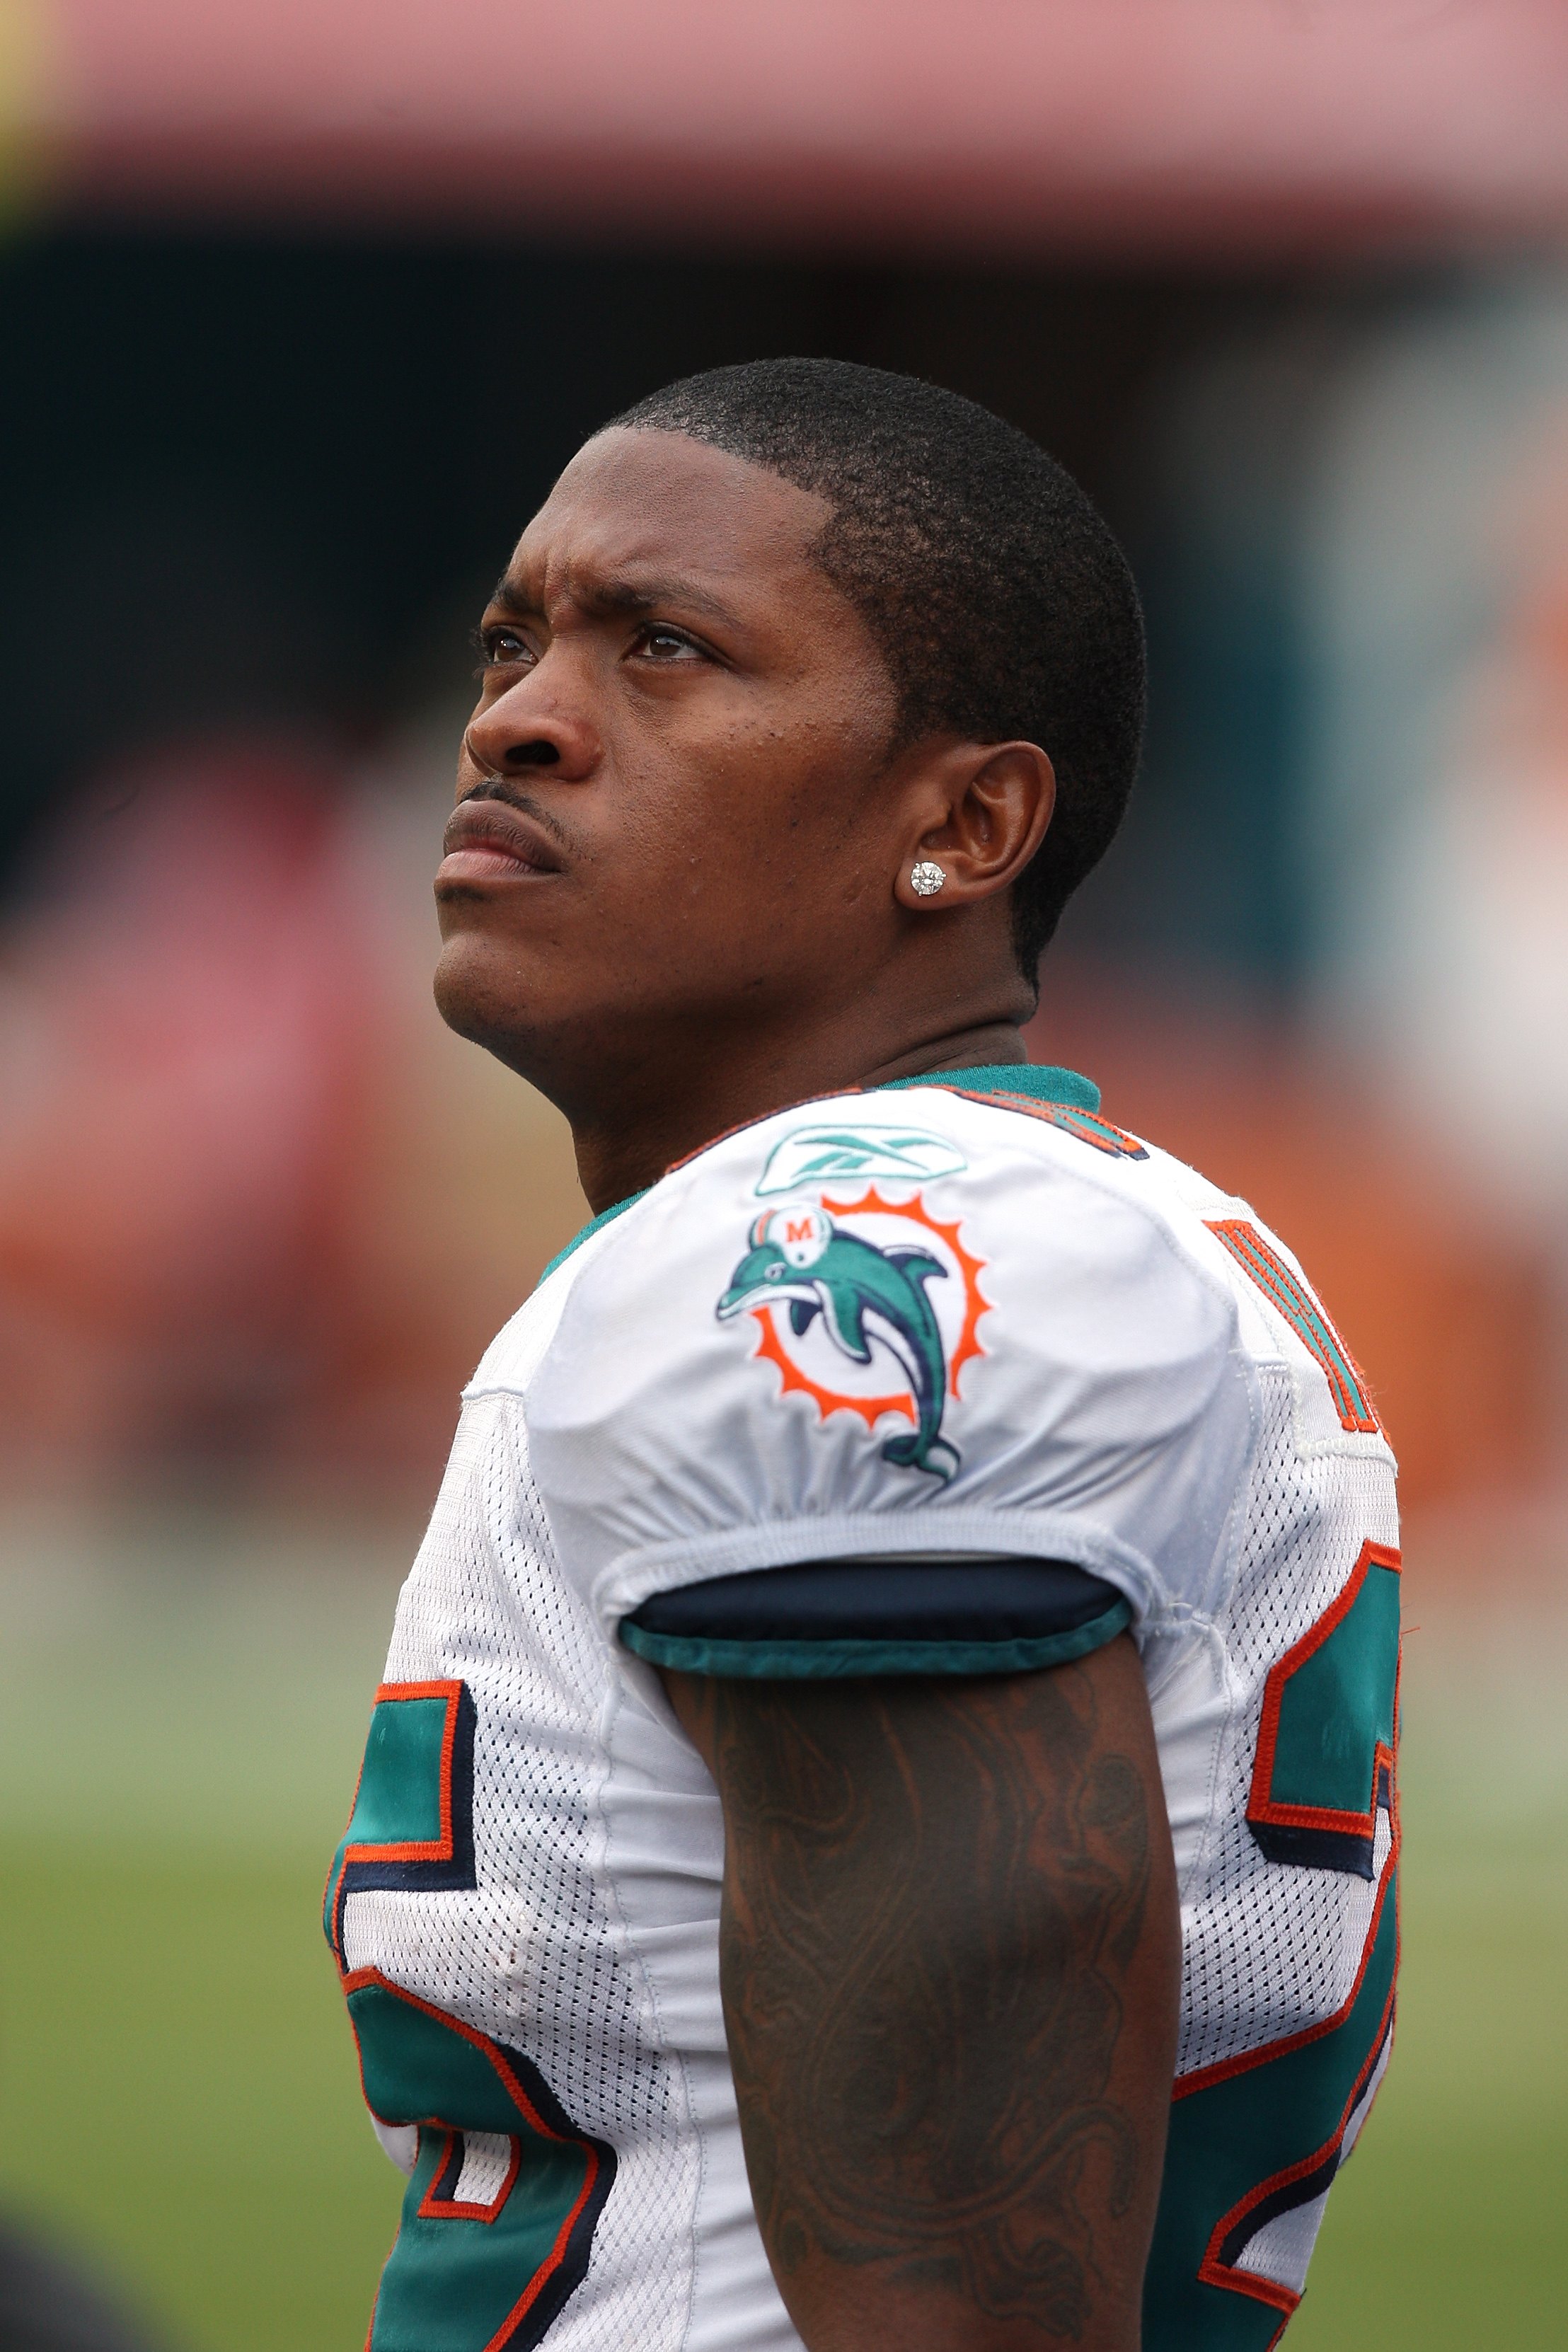 Will Allen of the Miami Dolphins in 2008.